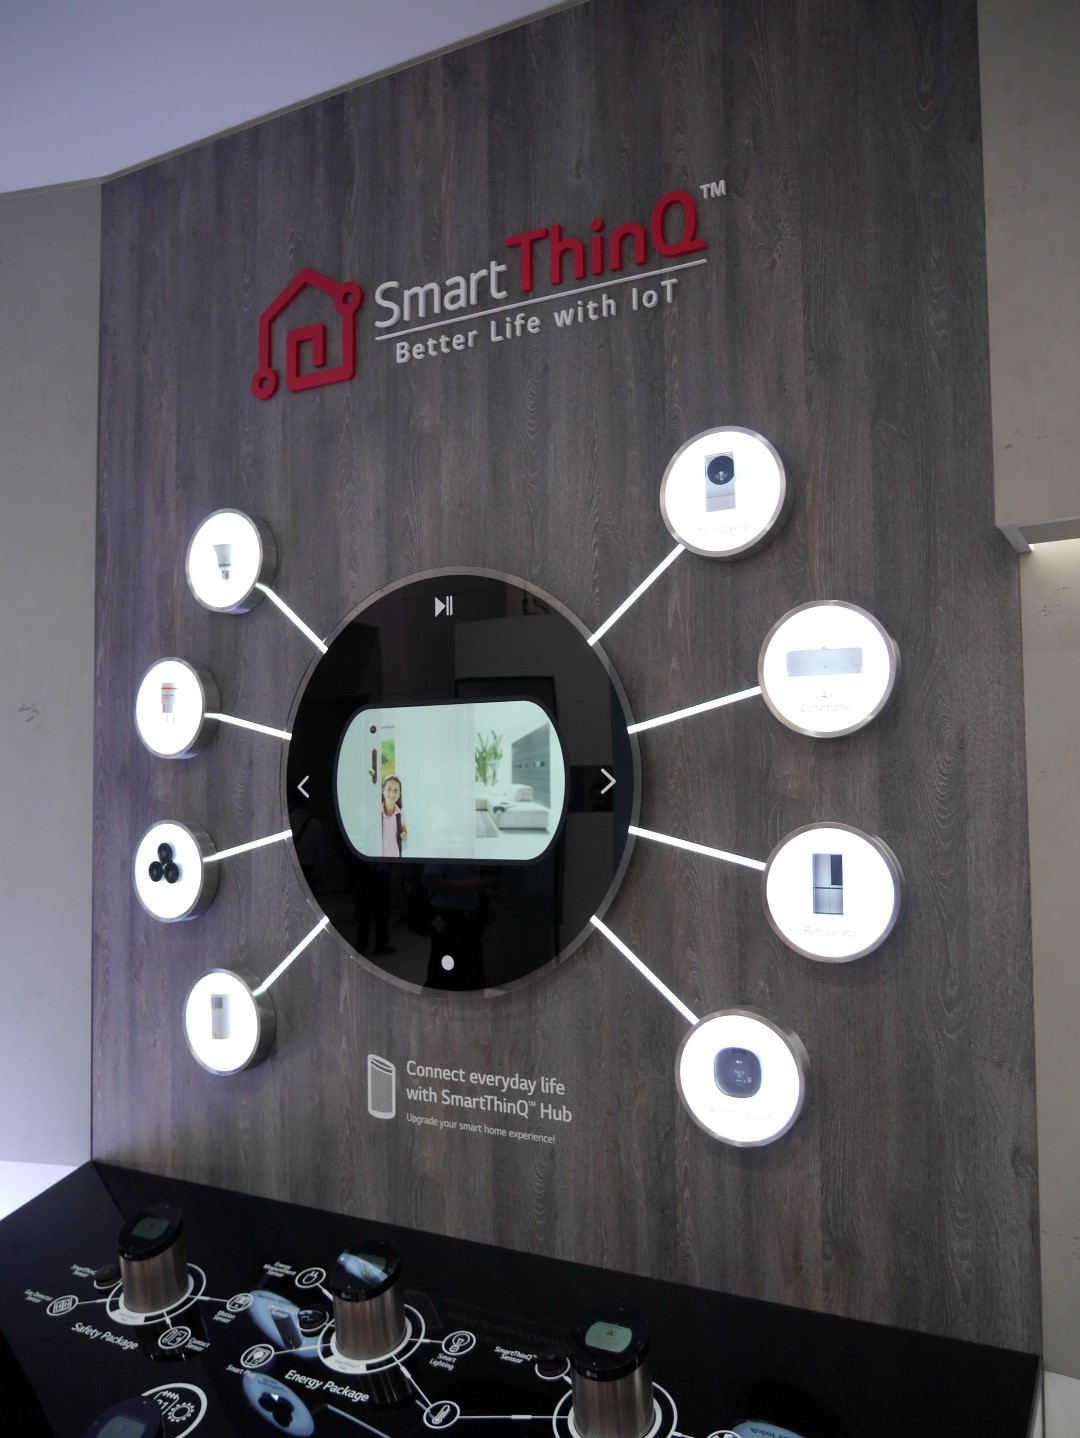 Smart Home by LG (1)